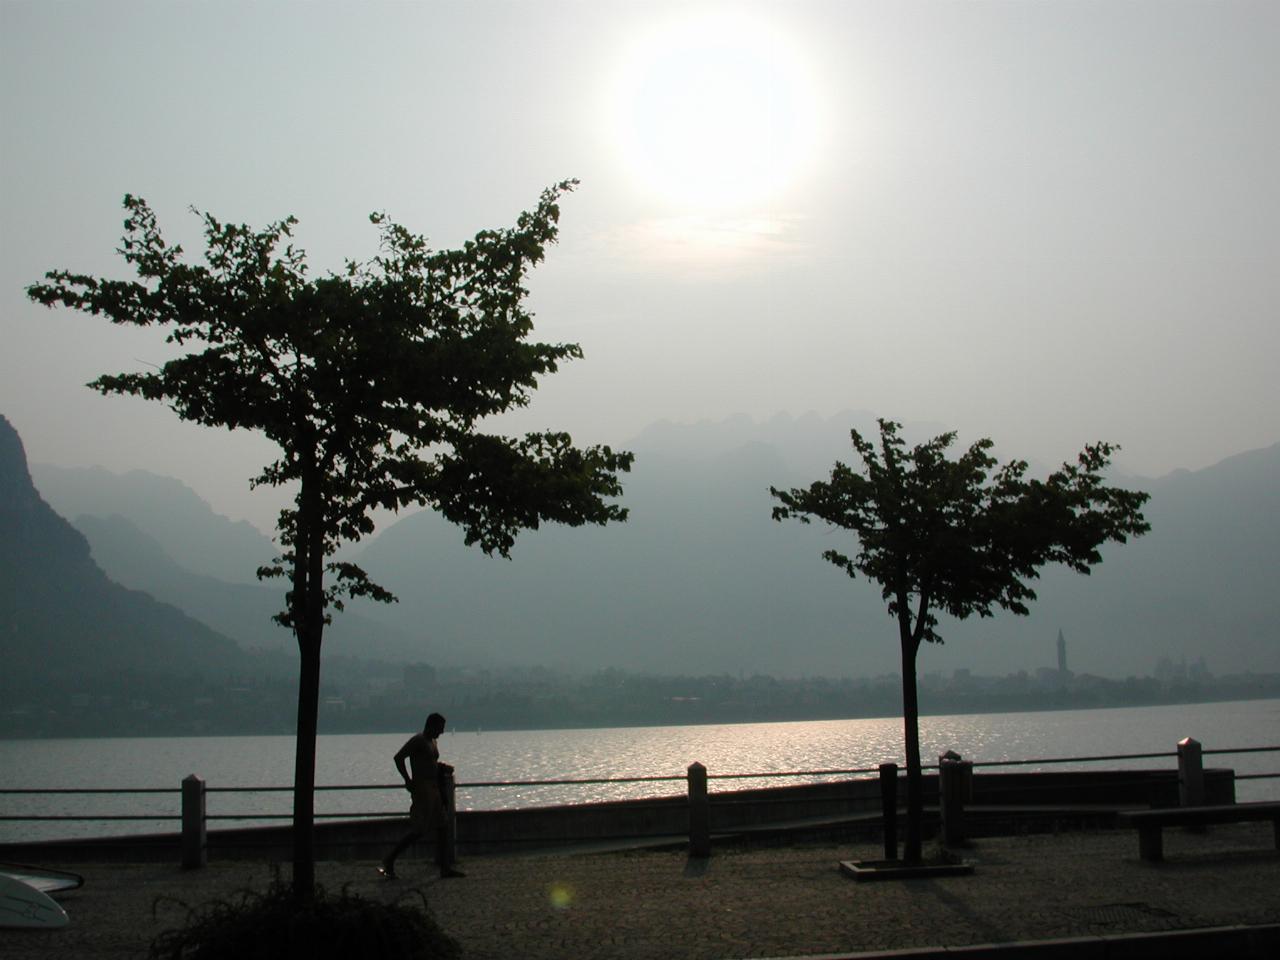 Looking towards Lecco (across Lake Lecco) on a hazy morning